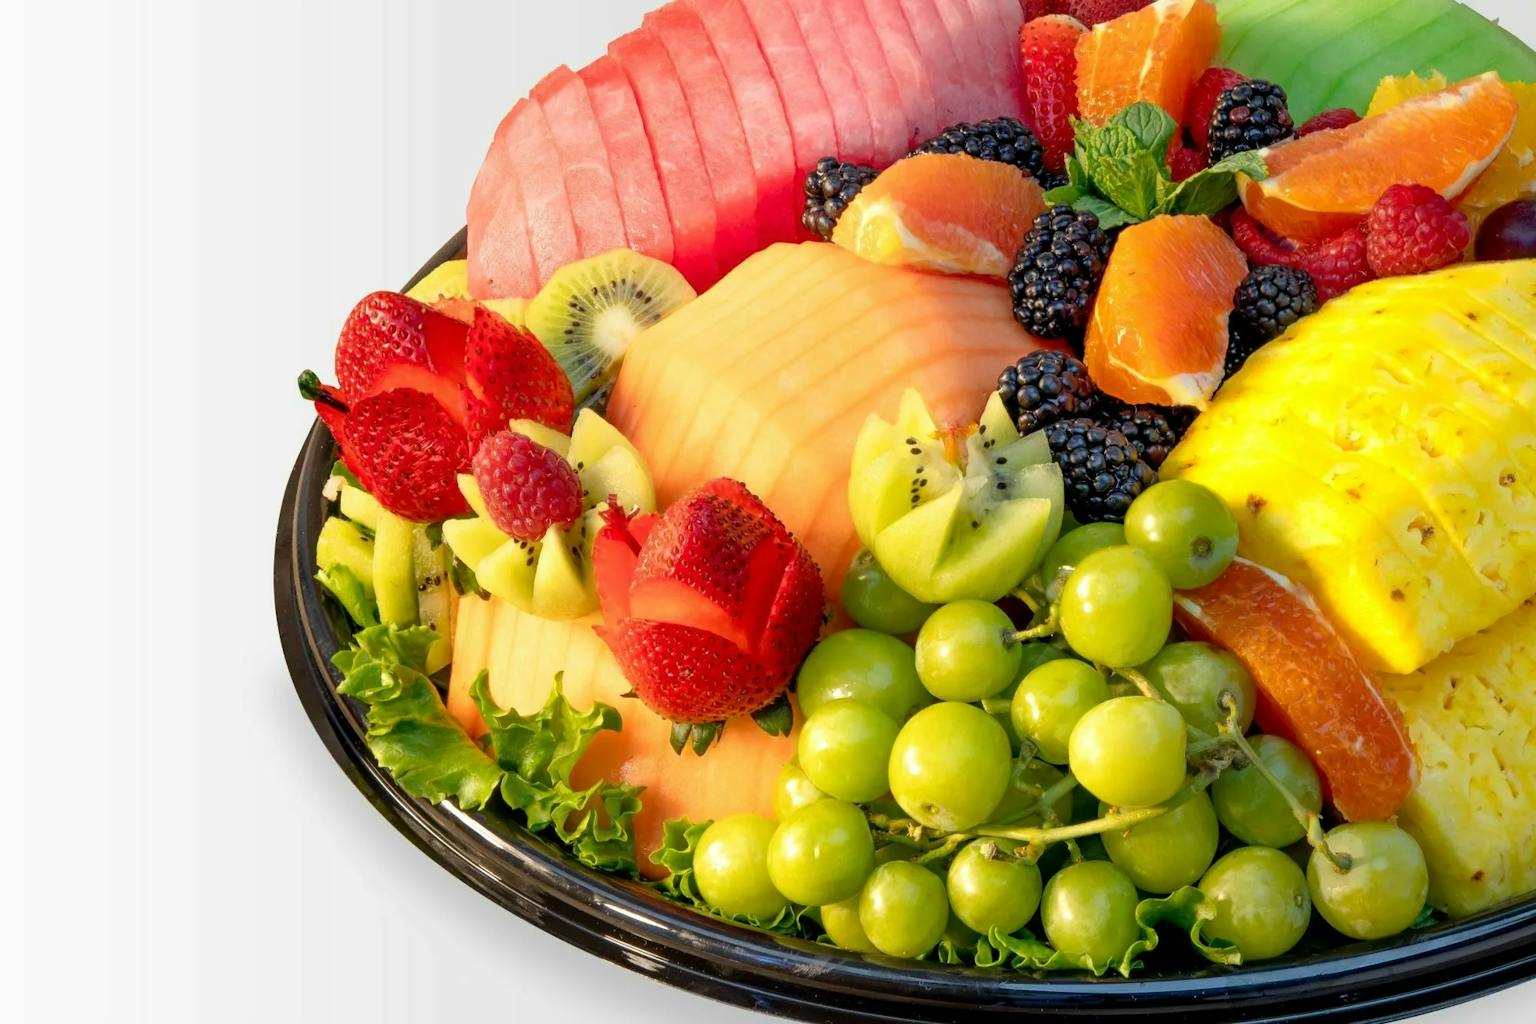 Seasonal fruit platter available at Gelson's